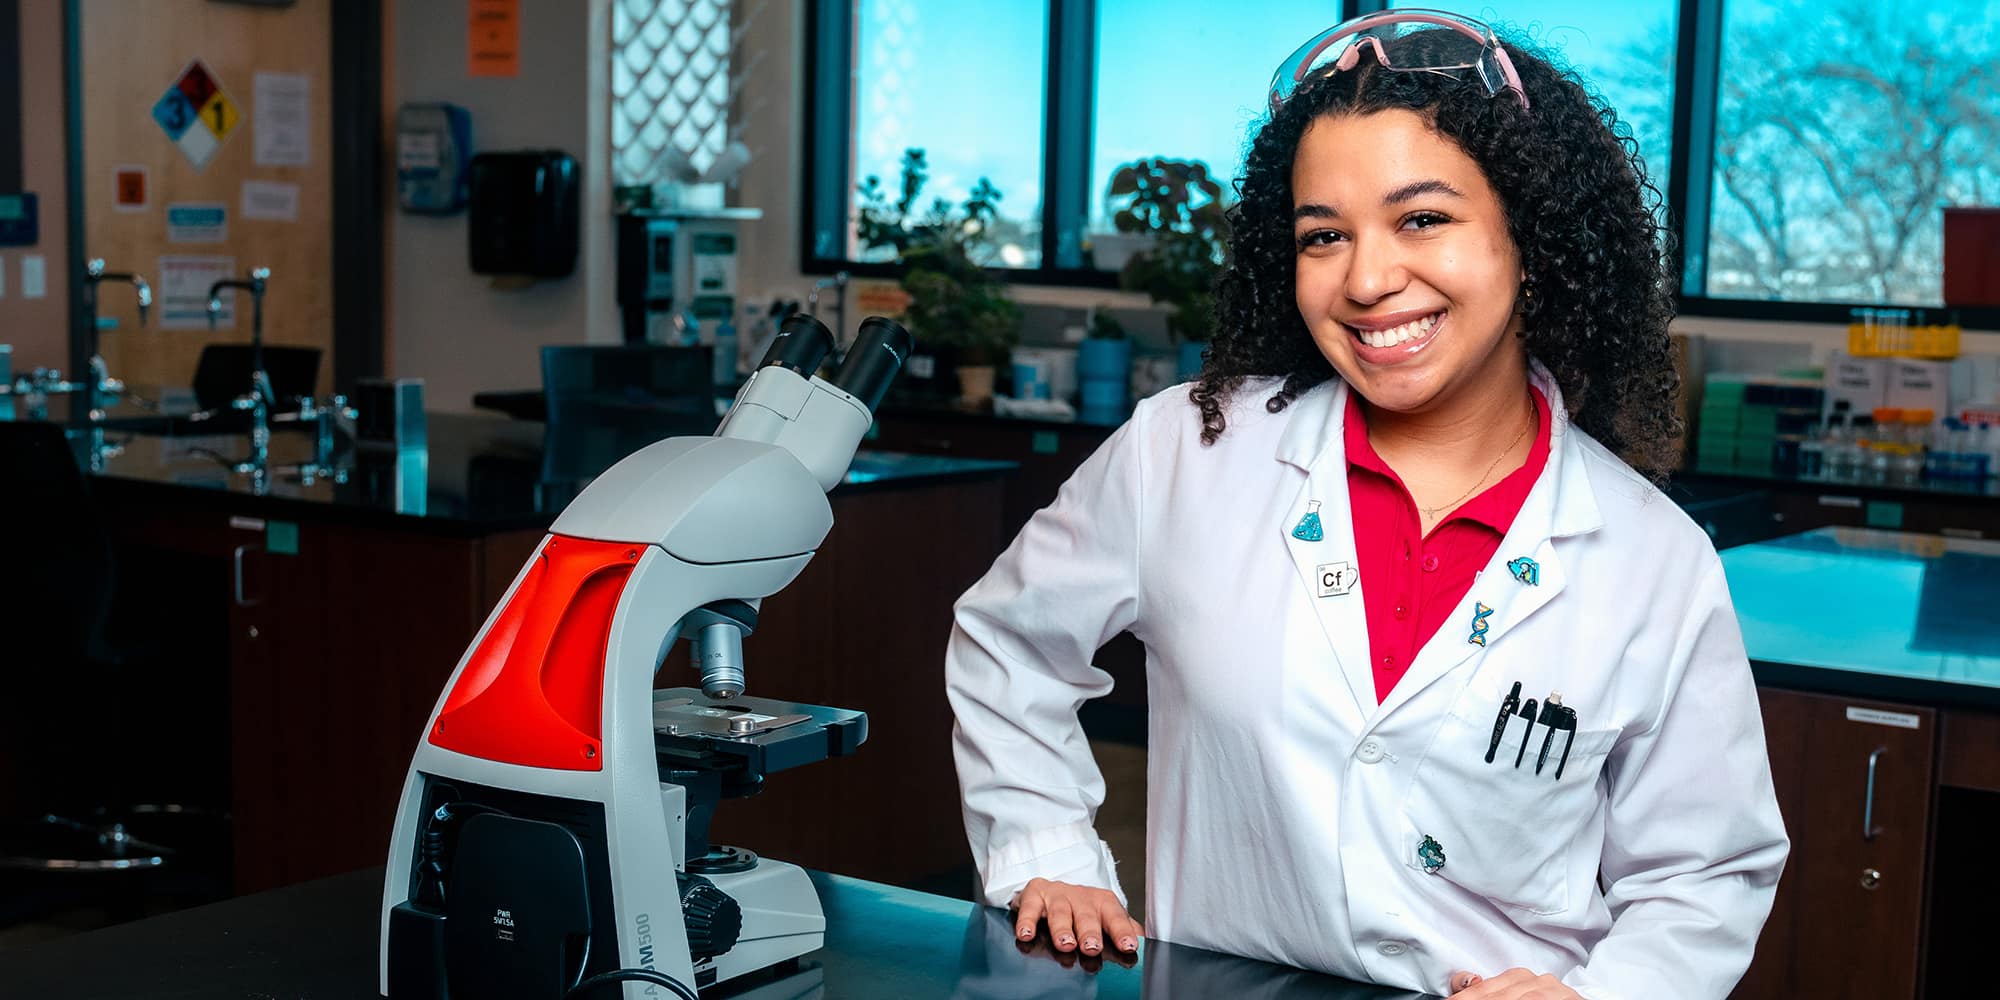 Makenzi, with curly hair, smiles in a white lab coat next to a microscope.